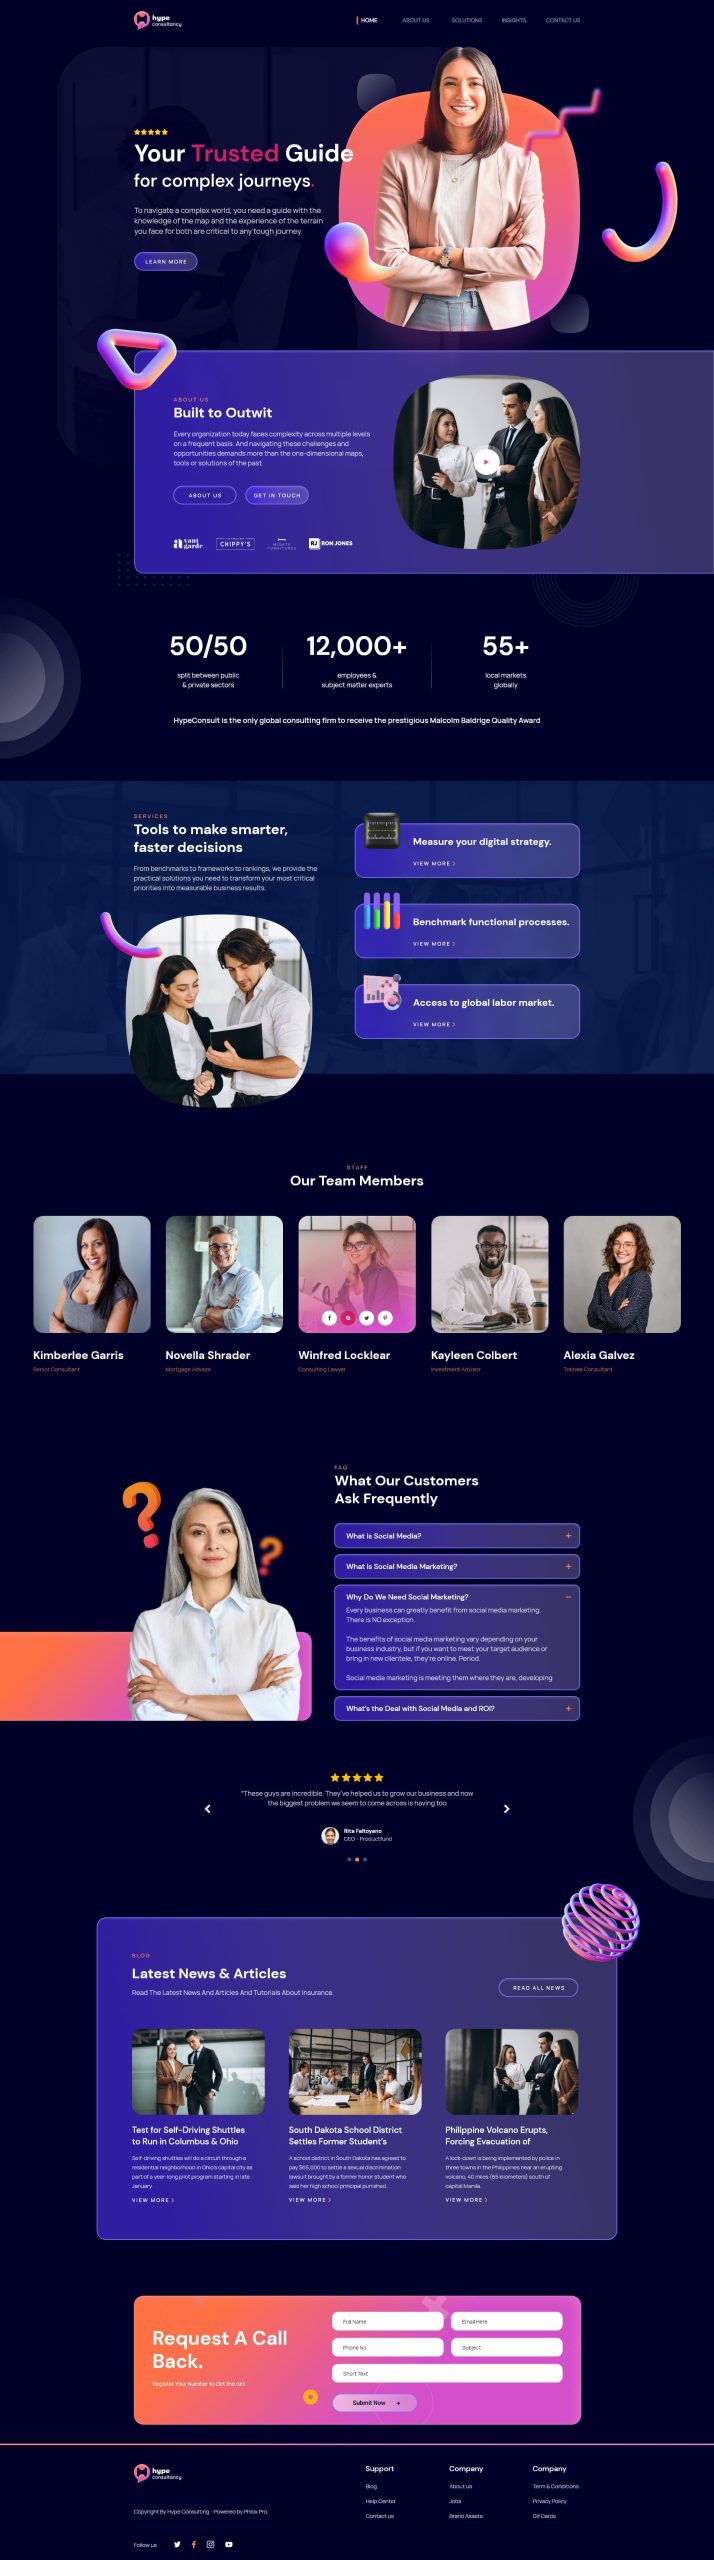 Hyper Consult Homepage